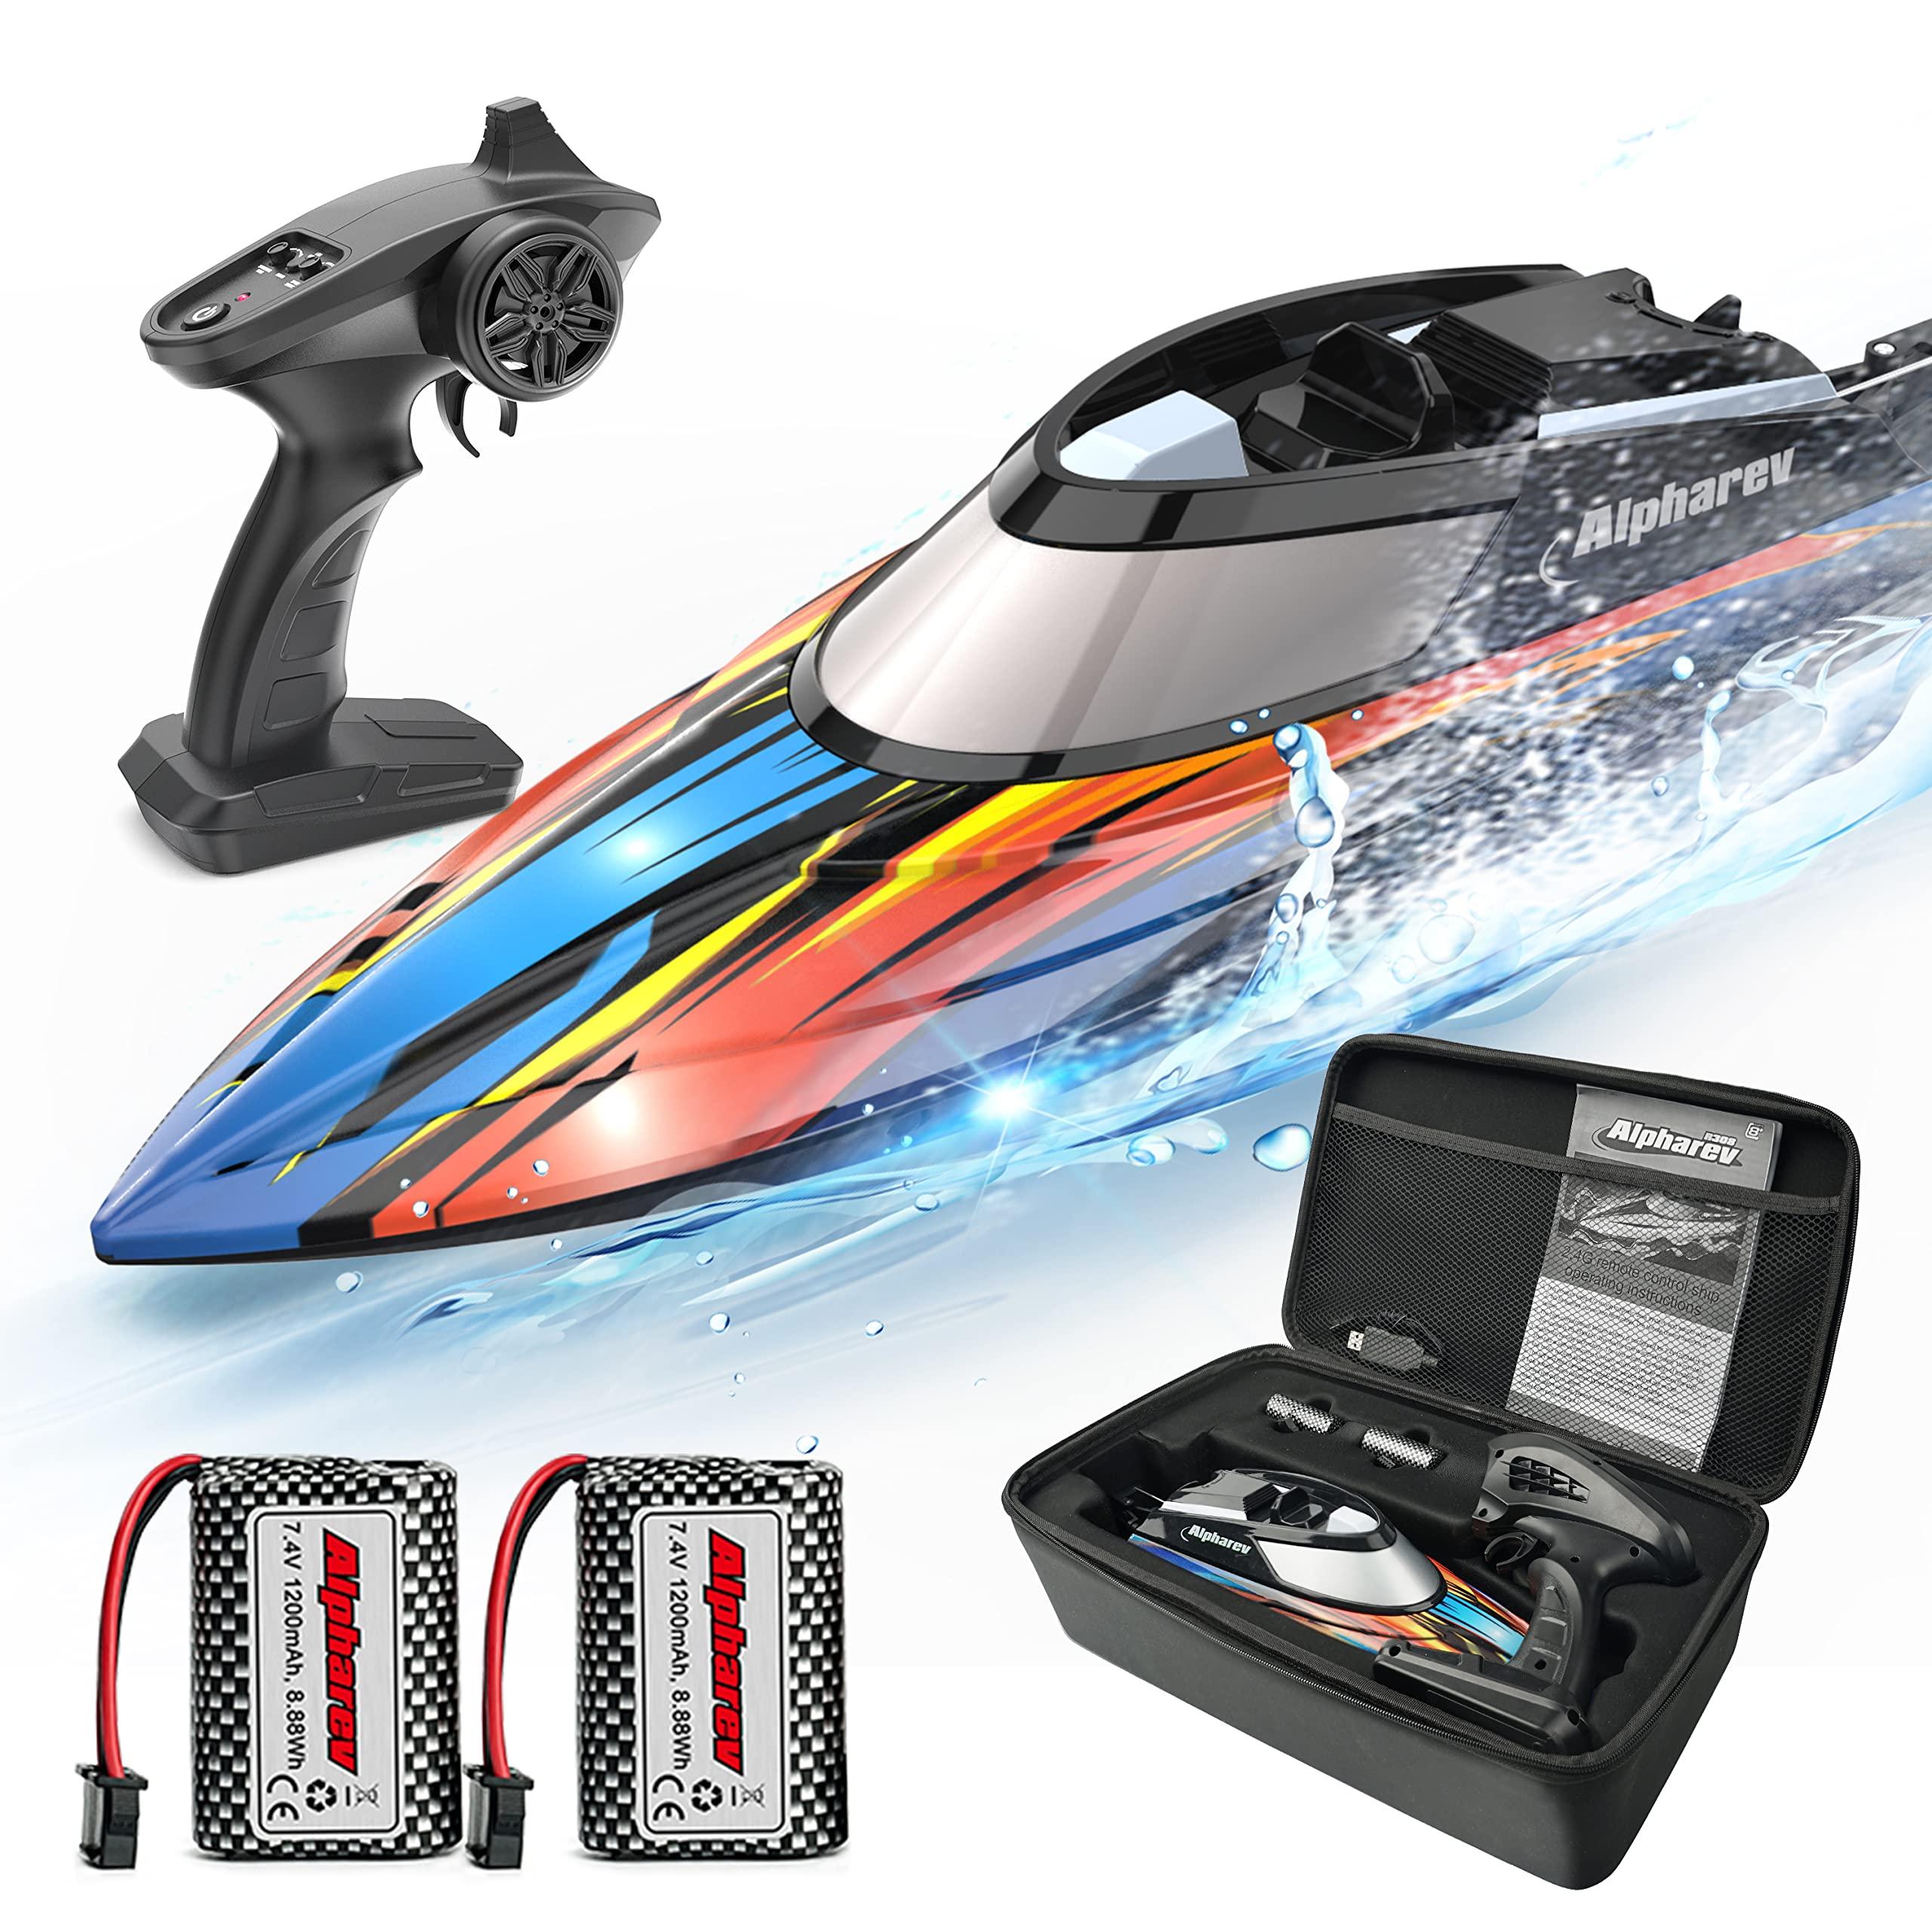 Large Electric Rc Boats: Choosing between electric and gas-powered RC boats 